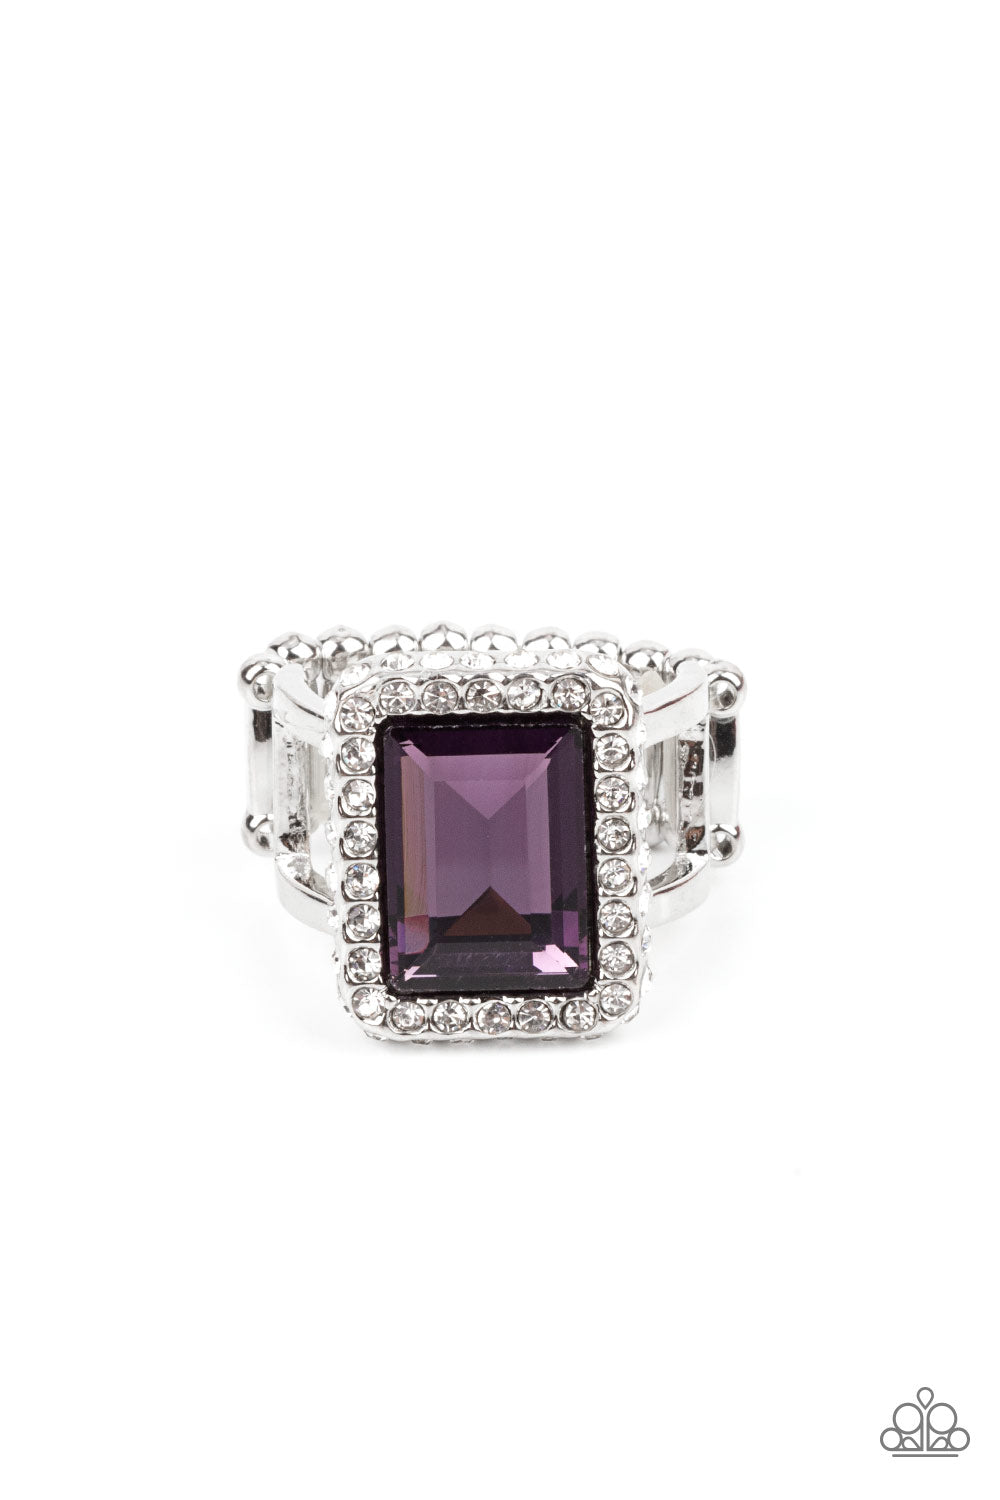 Glamorously Glitzy Purple Ring - Paparazzi Accessories  Bordered in a sparkly frame of white rhinestones, an oversized purple emerald cut gem adorns layered silver bands atop the finger for a jaw-dropping fashion. Features a stretchy band for a flexible fit.  All Paparazzi Accessories are lead free and nickel free!  Sold as one individual ring.